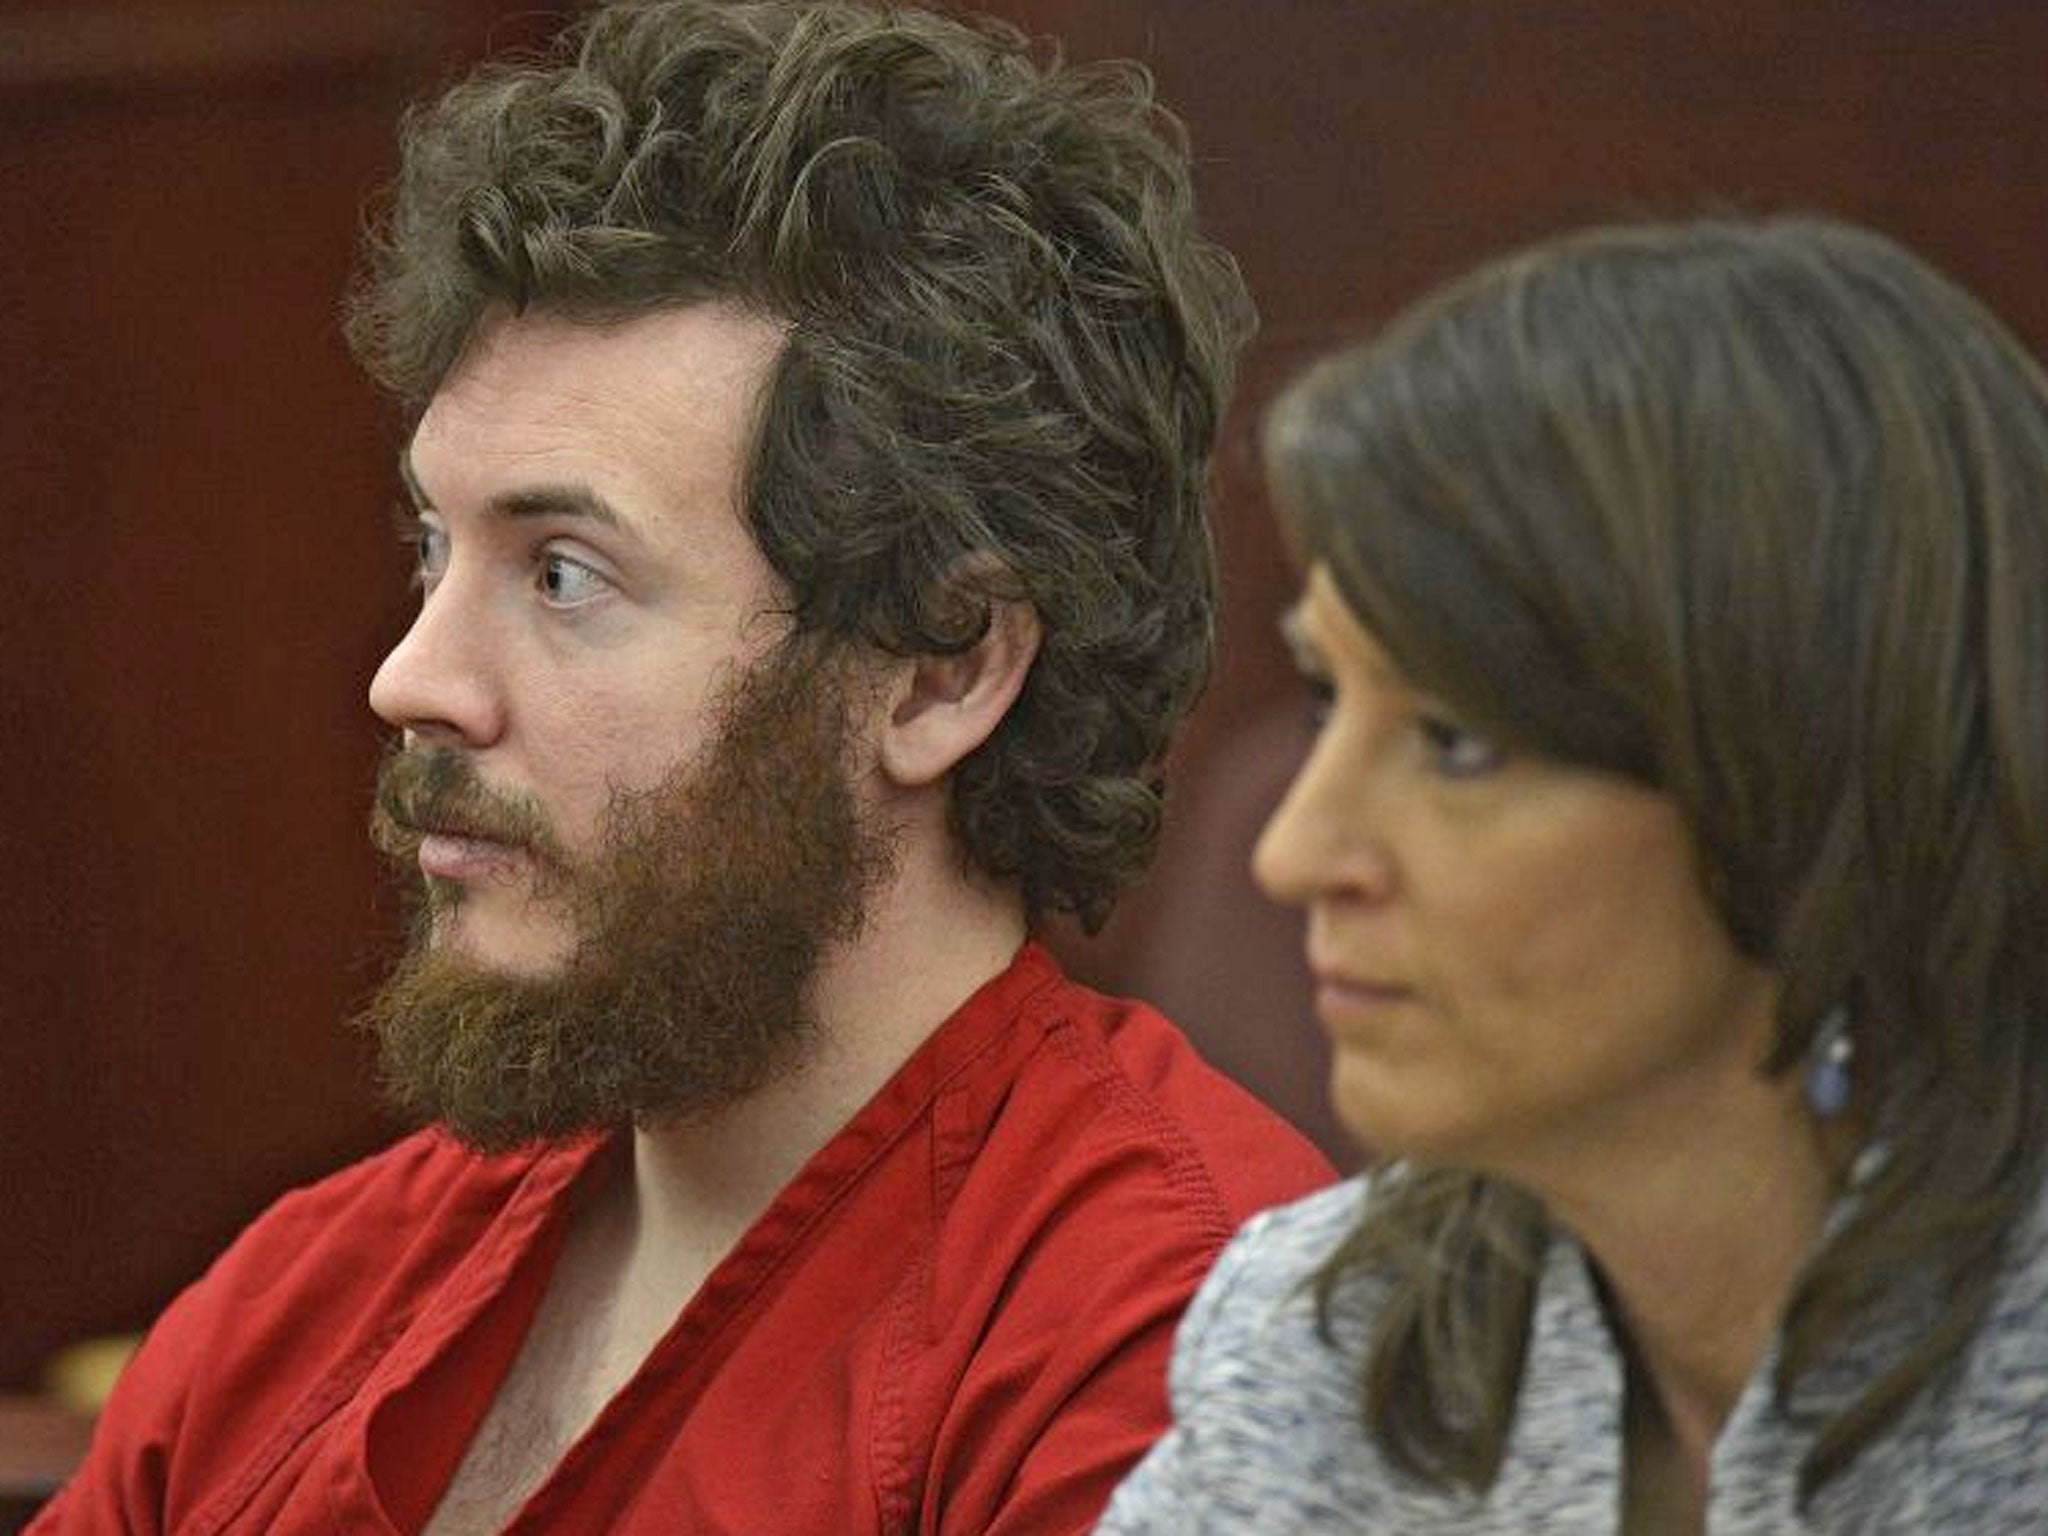 James Holmes, left, and defense attorney Tamara Brady appear in district court in Centennial, Colorado for his arraignment